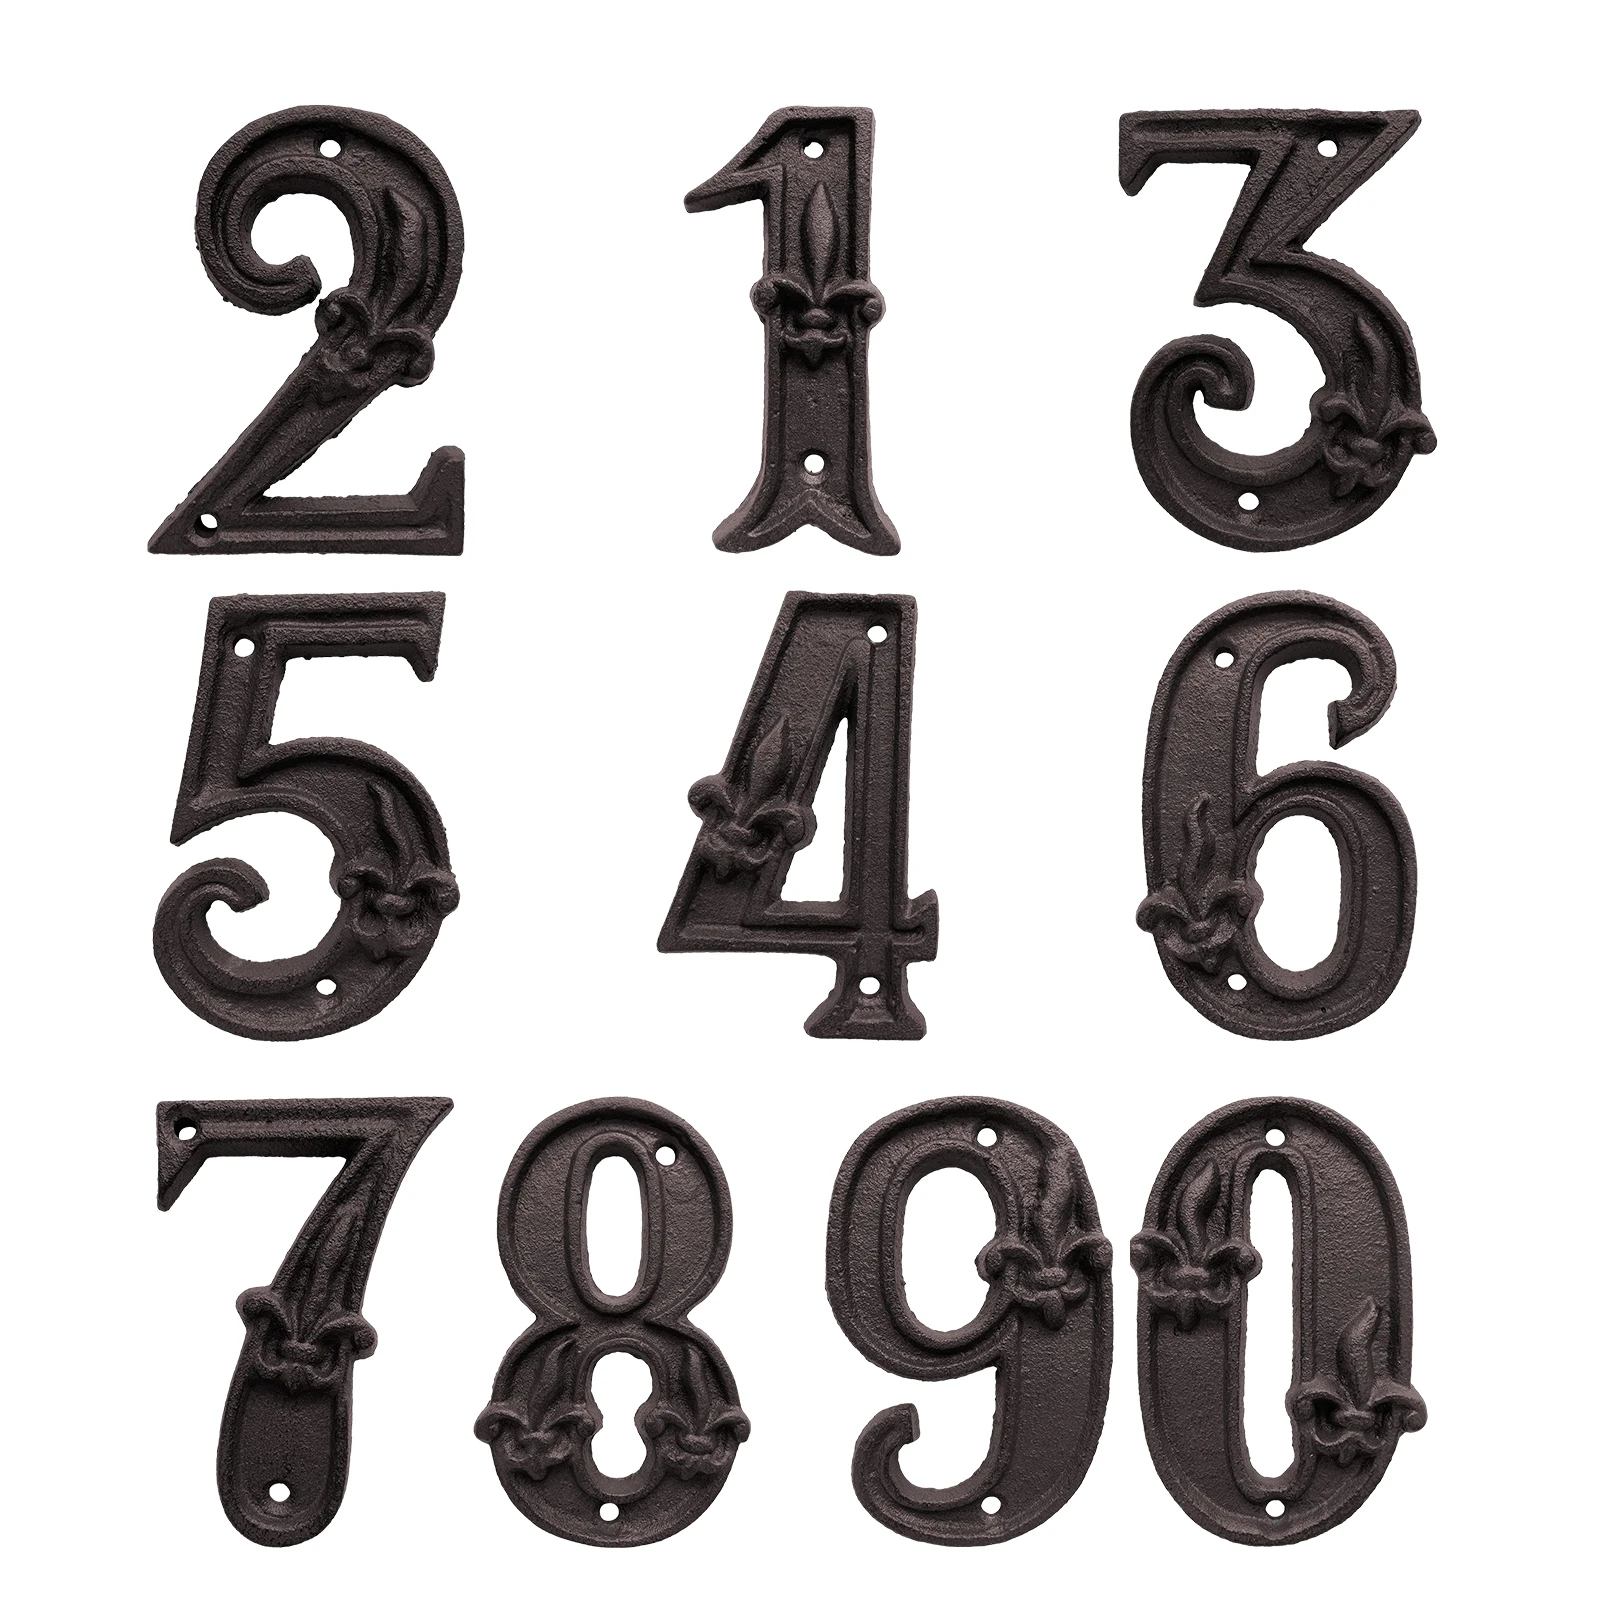 Street Zayookey 4.5 Inch Cast Iron House Number Rustic Address Sign Metal Number for Home Door Mailbox Fence